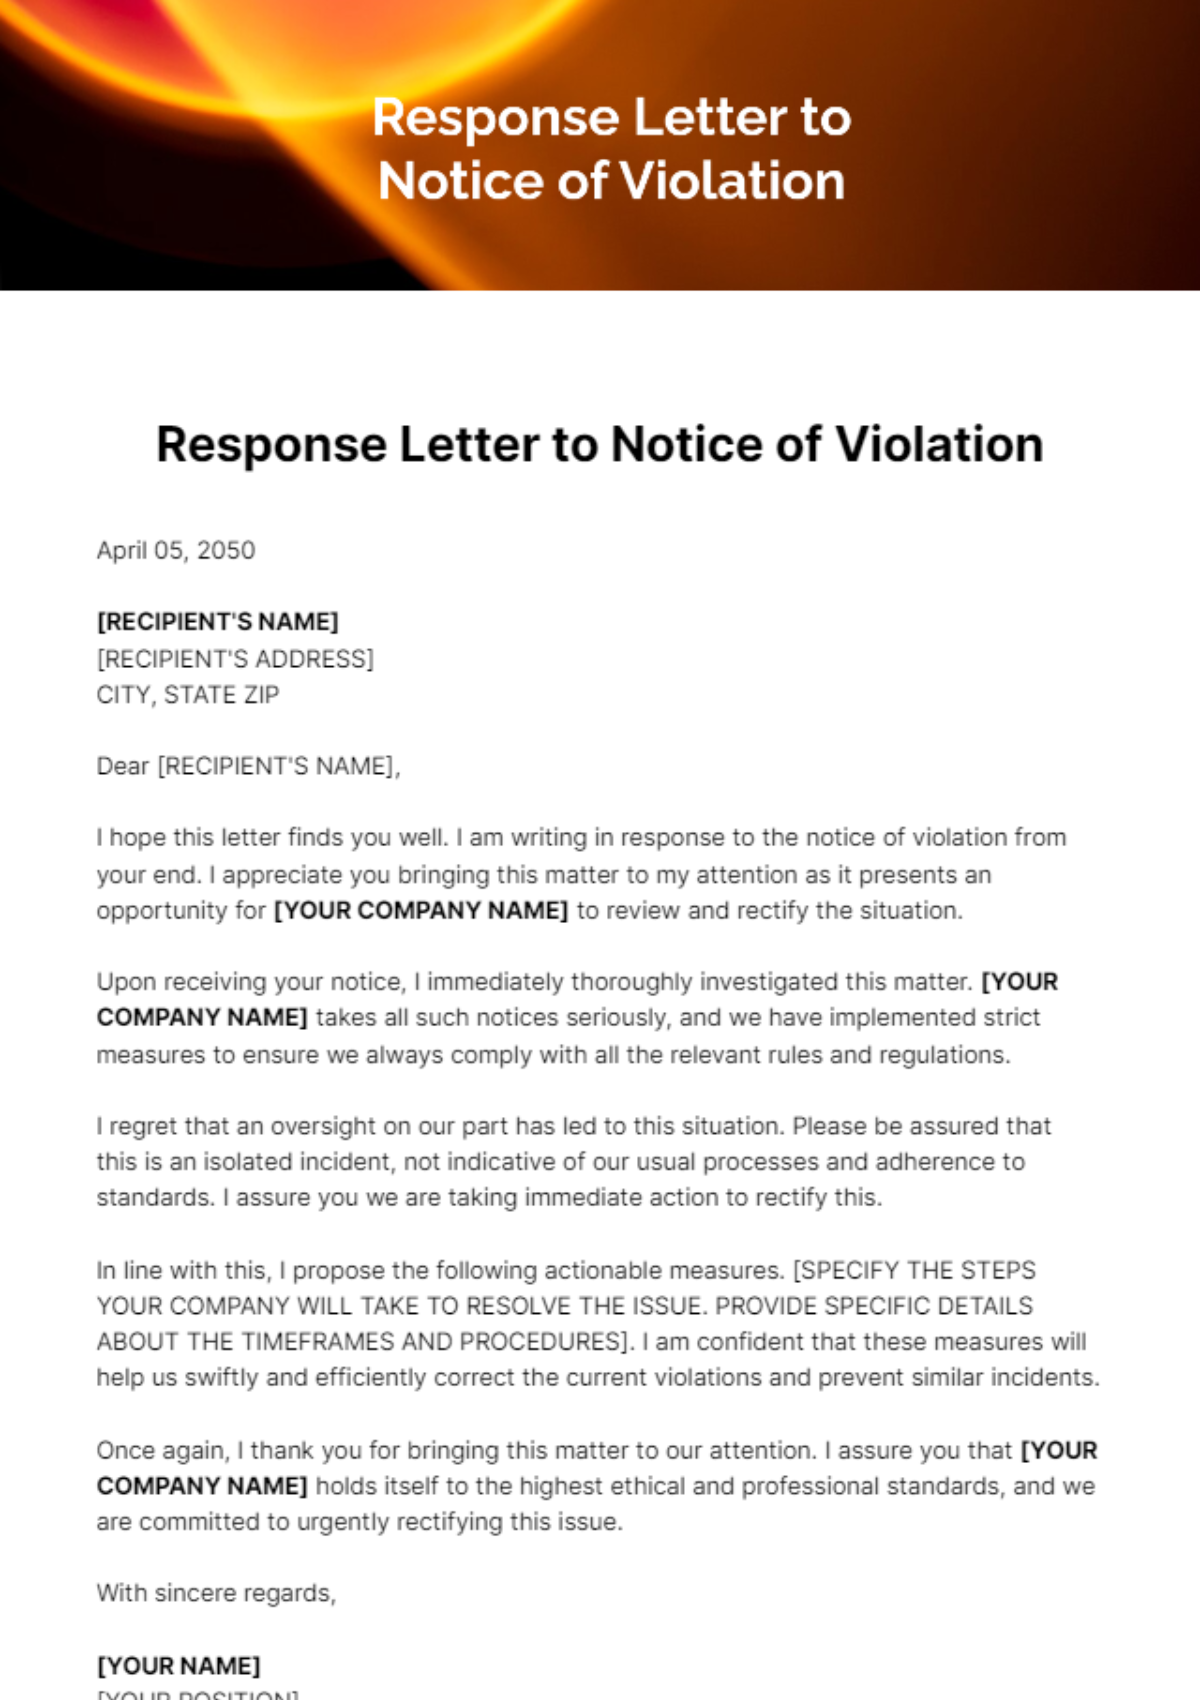 Free Response Letter to Notice of Violation Template